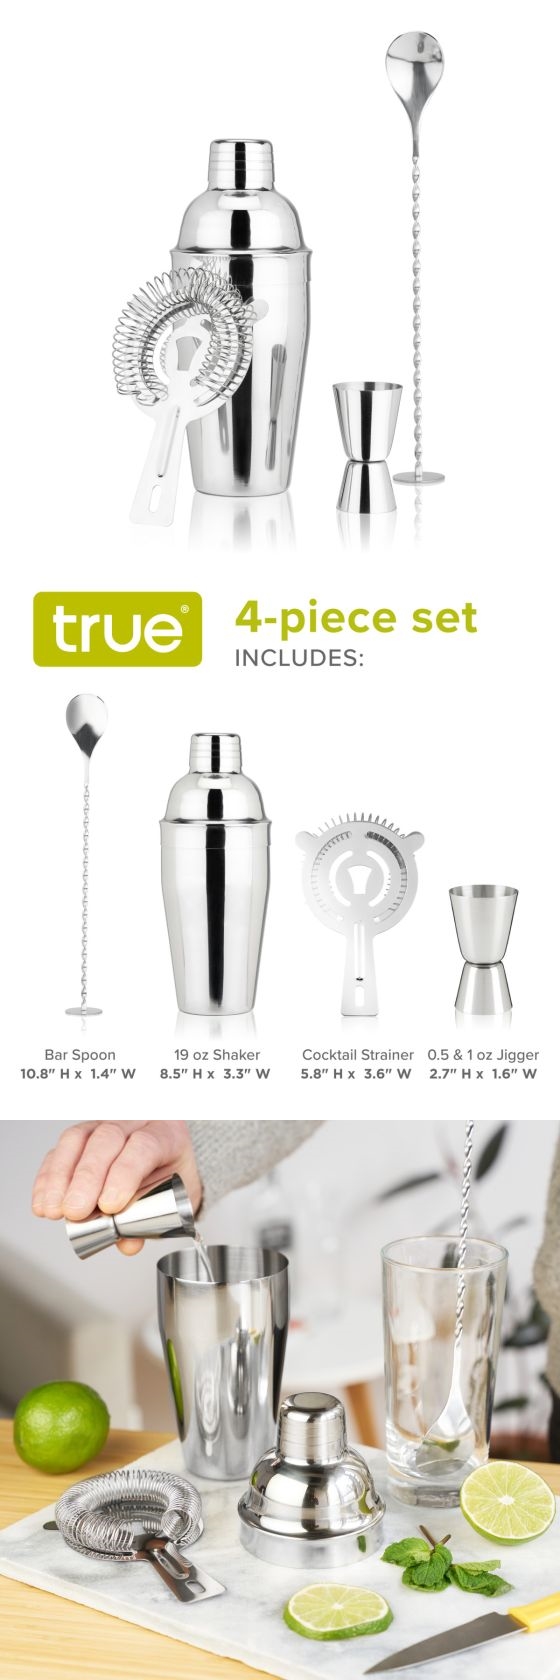 "Fortify" Polished Stainless-Steel 4-pc Barware Set by True